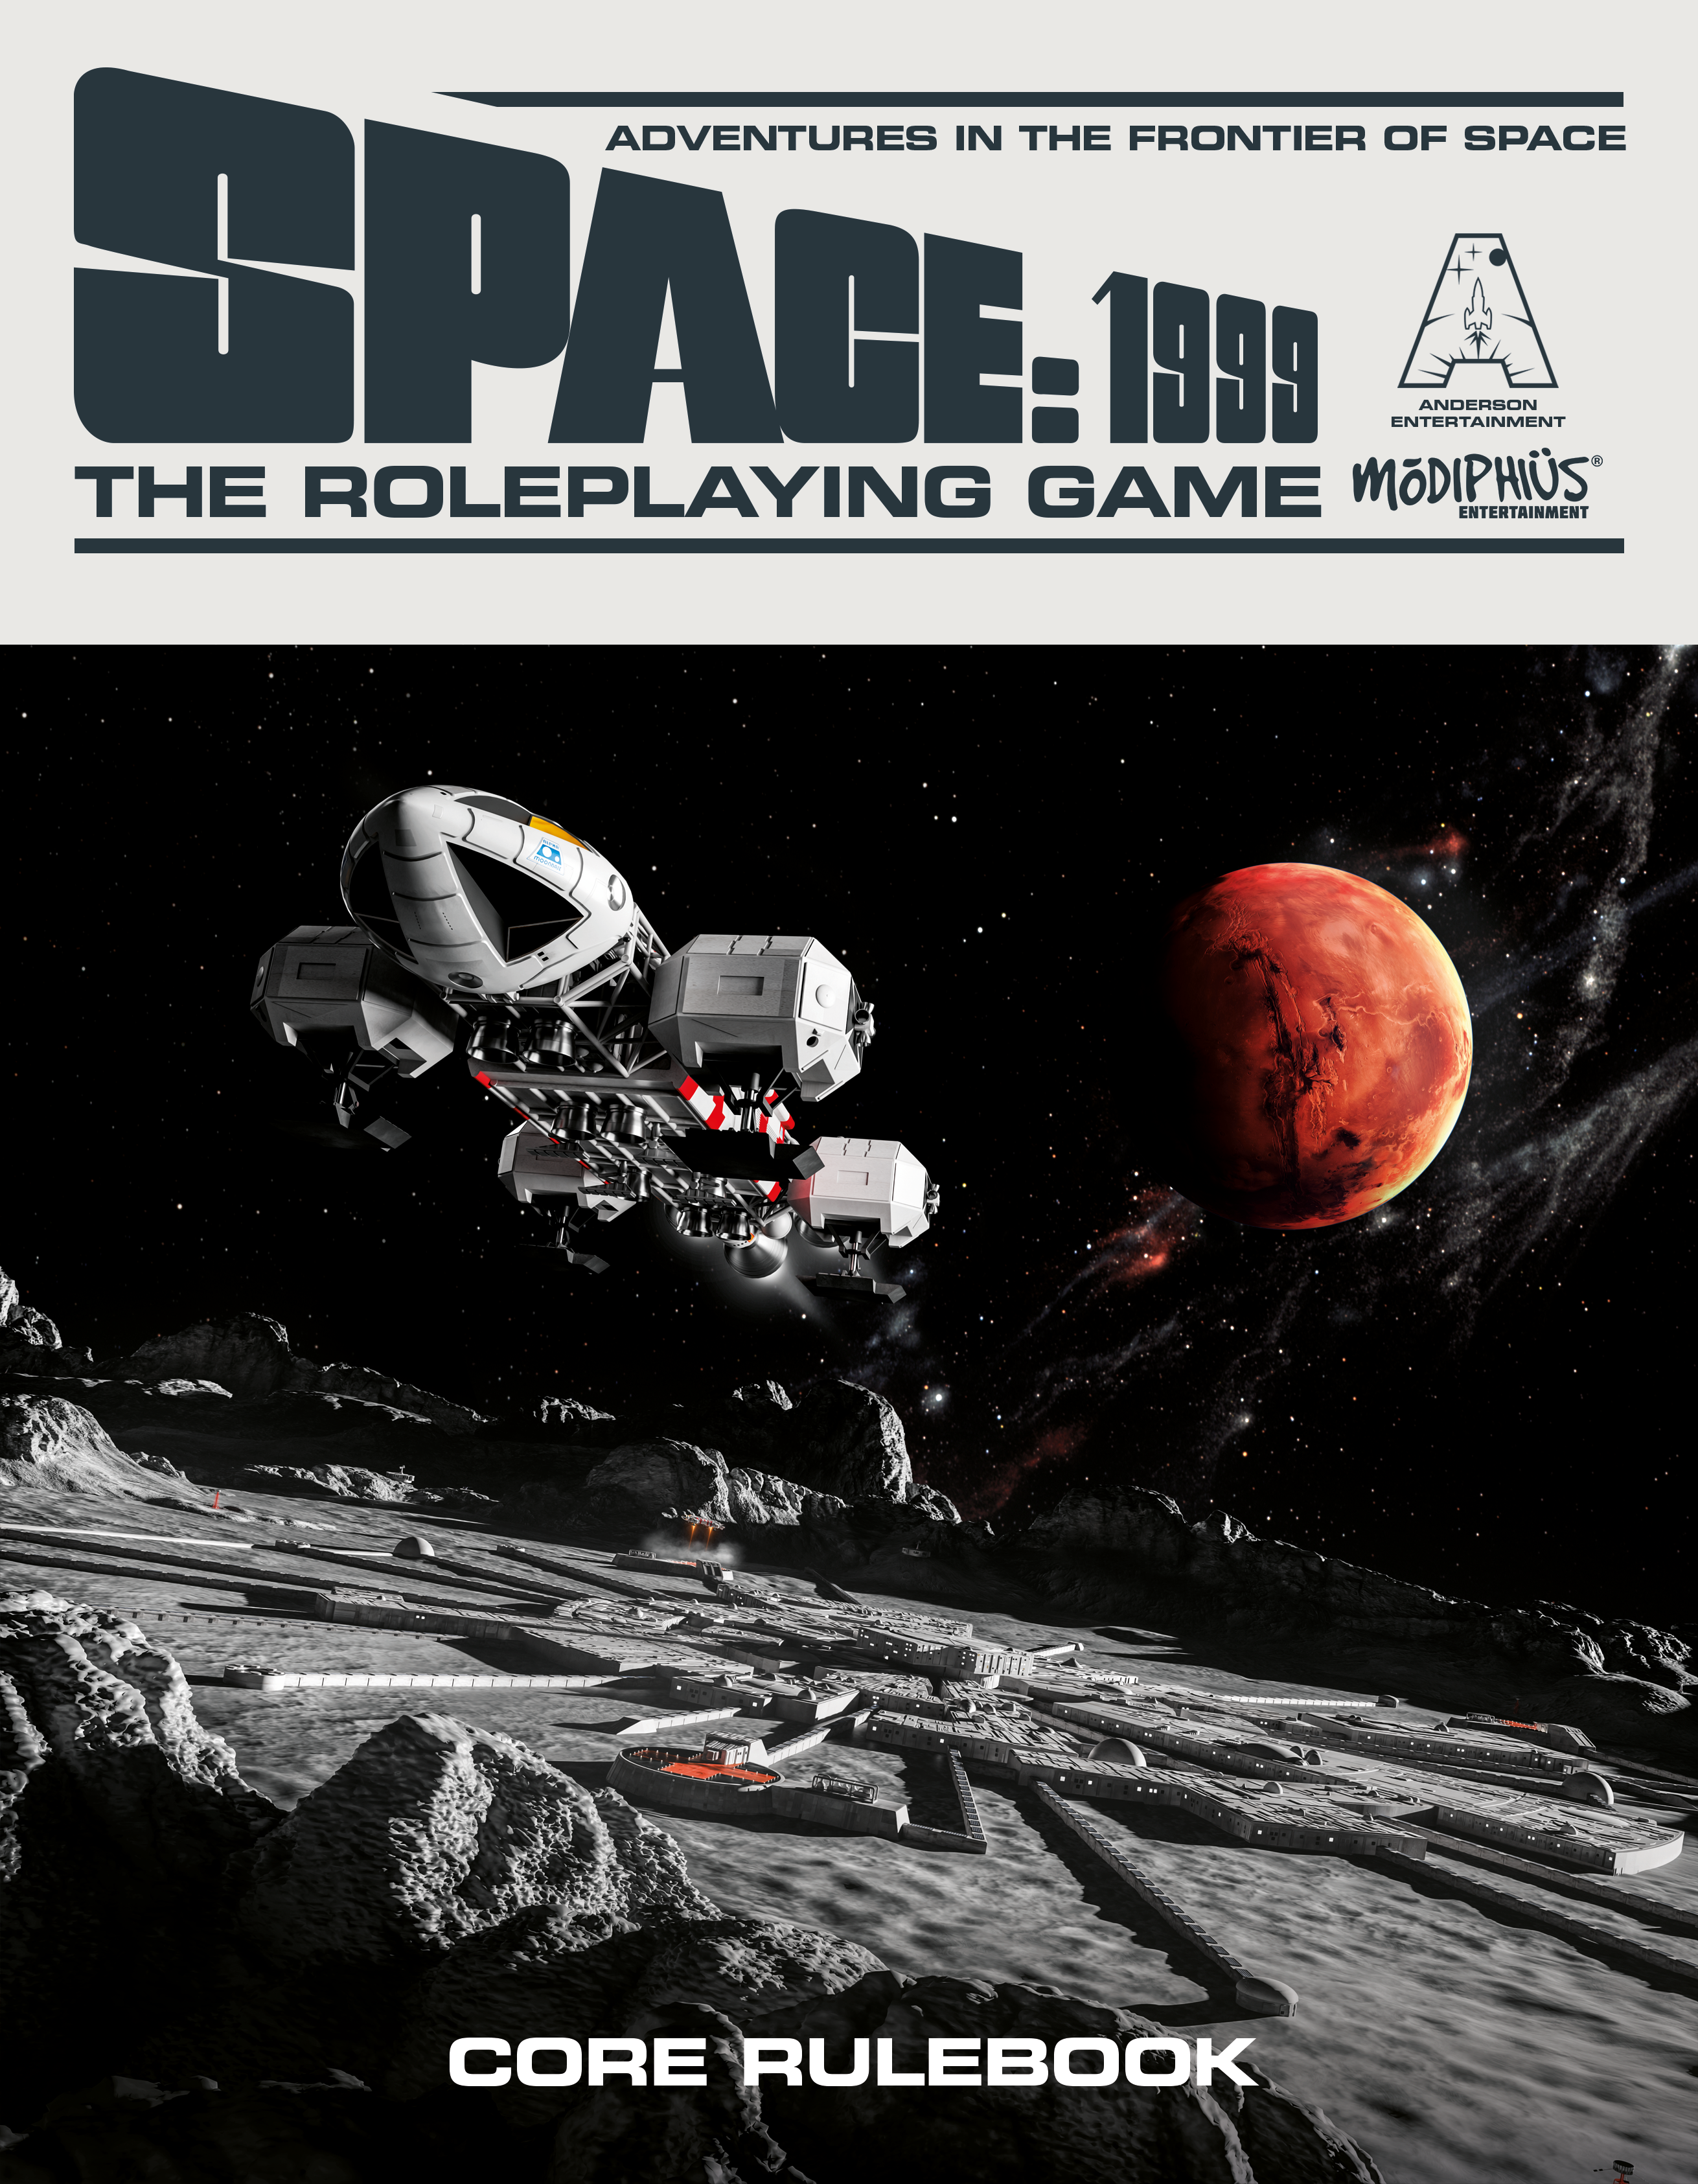 The cover of the Space: 1999 tabletop RPG.